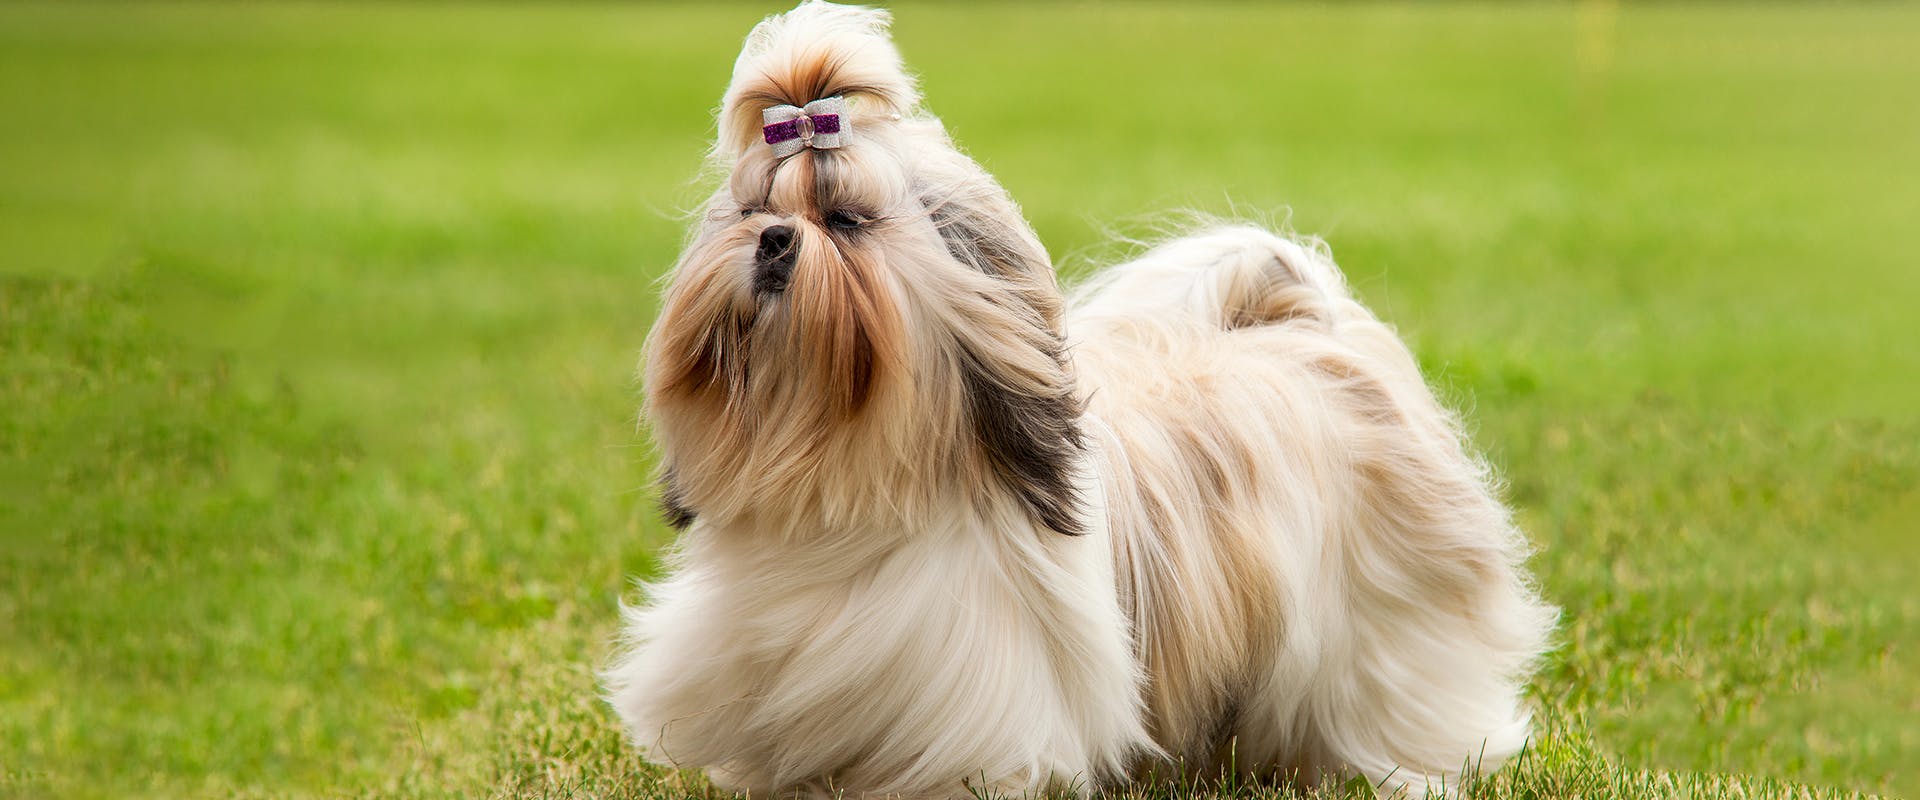 A long-haired Shih Tzu running in a park